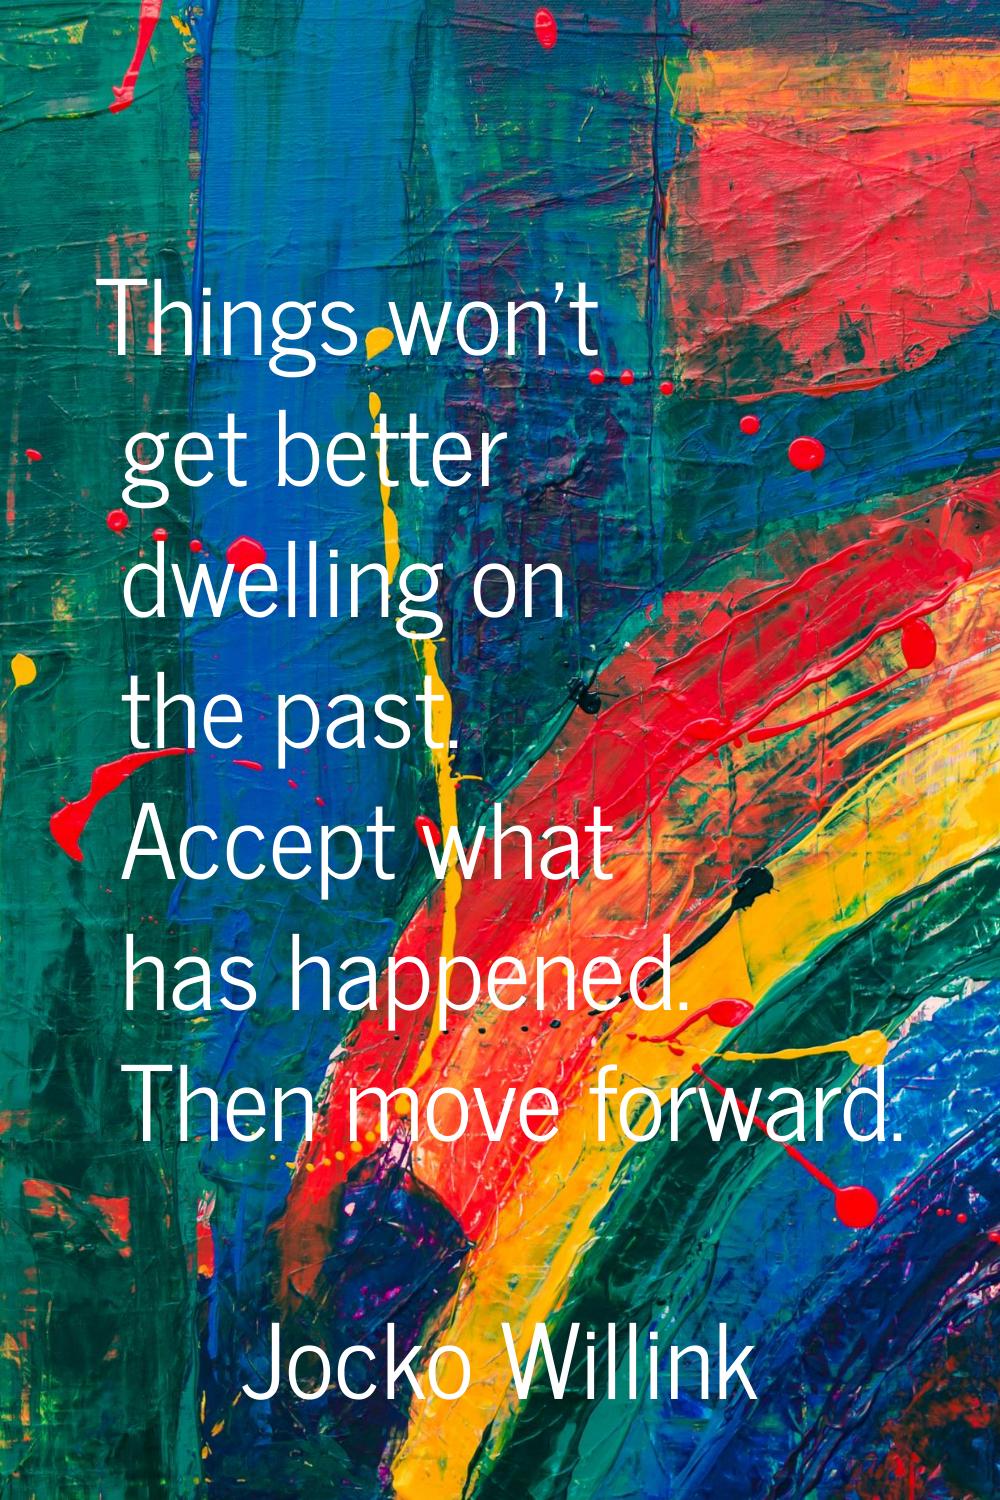 Things won't get better dwelling on the past. Accept what has happened. Then move forward.